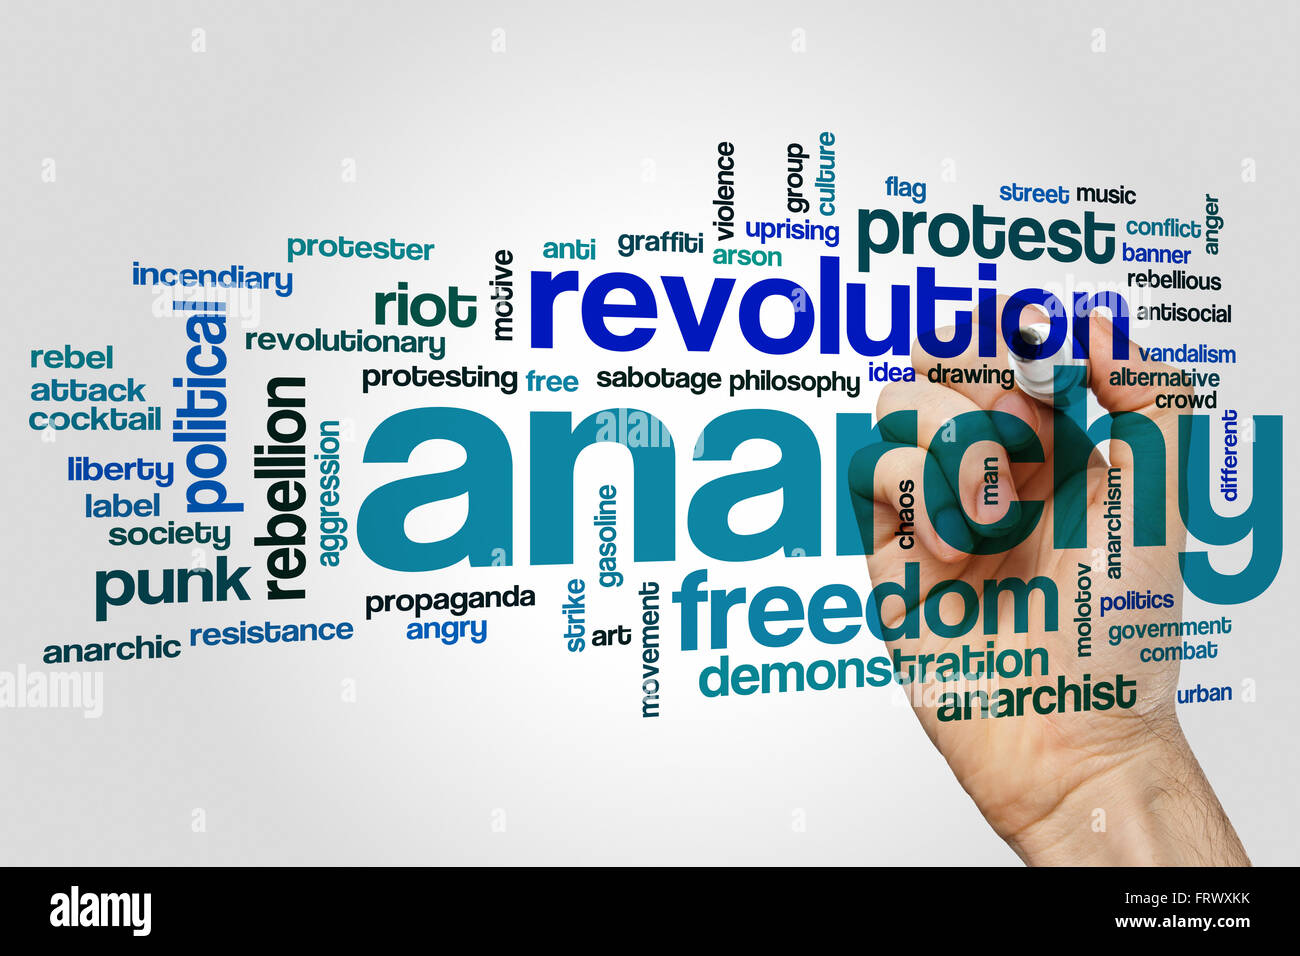 Anarchy word cloud concept Stock Photo